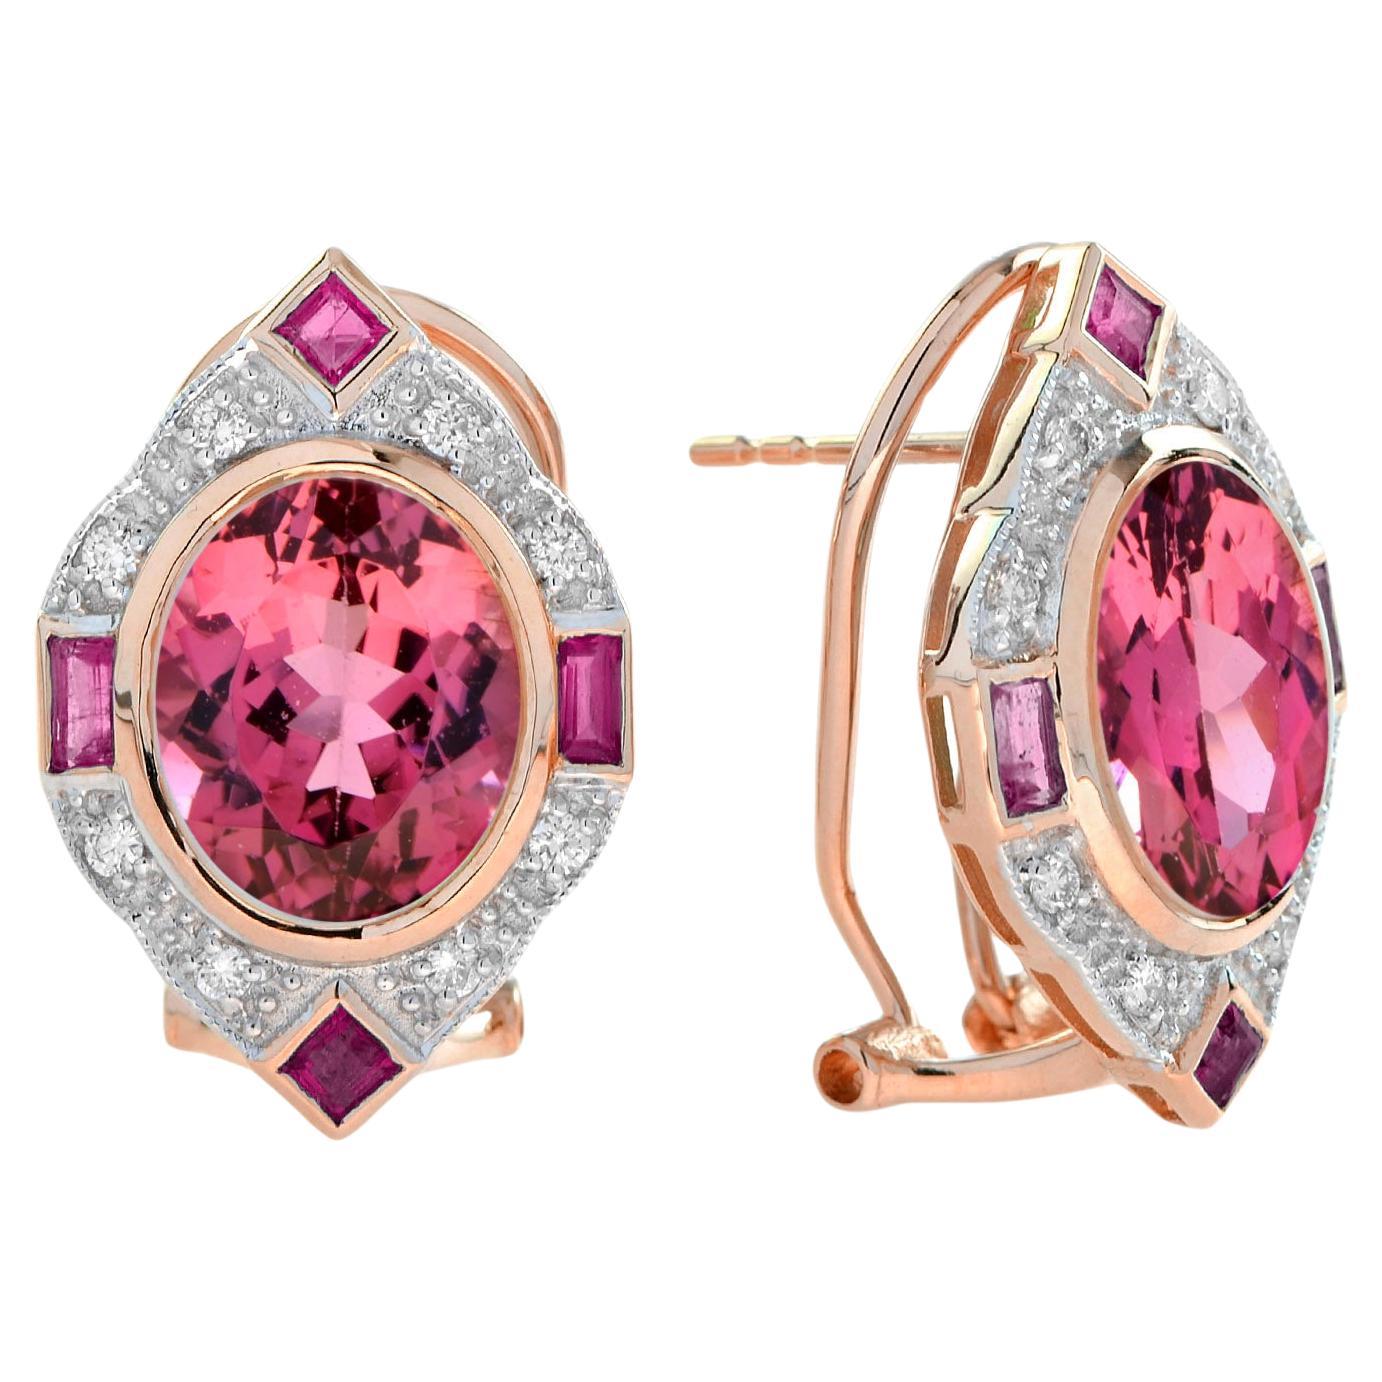 10.48 Ct. Pink Tourmaline Ruby and Diamond Vintage Inspired Earrings in 14K Gold For Sale